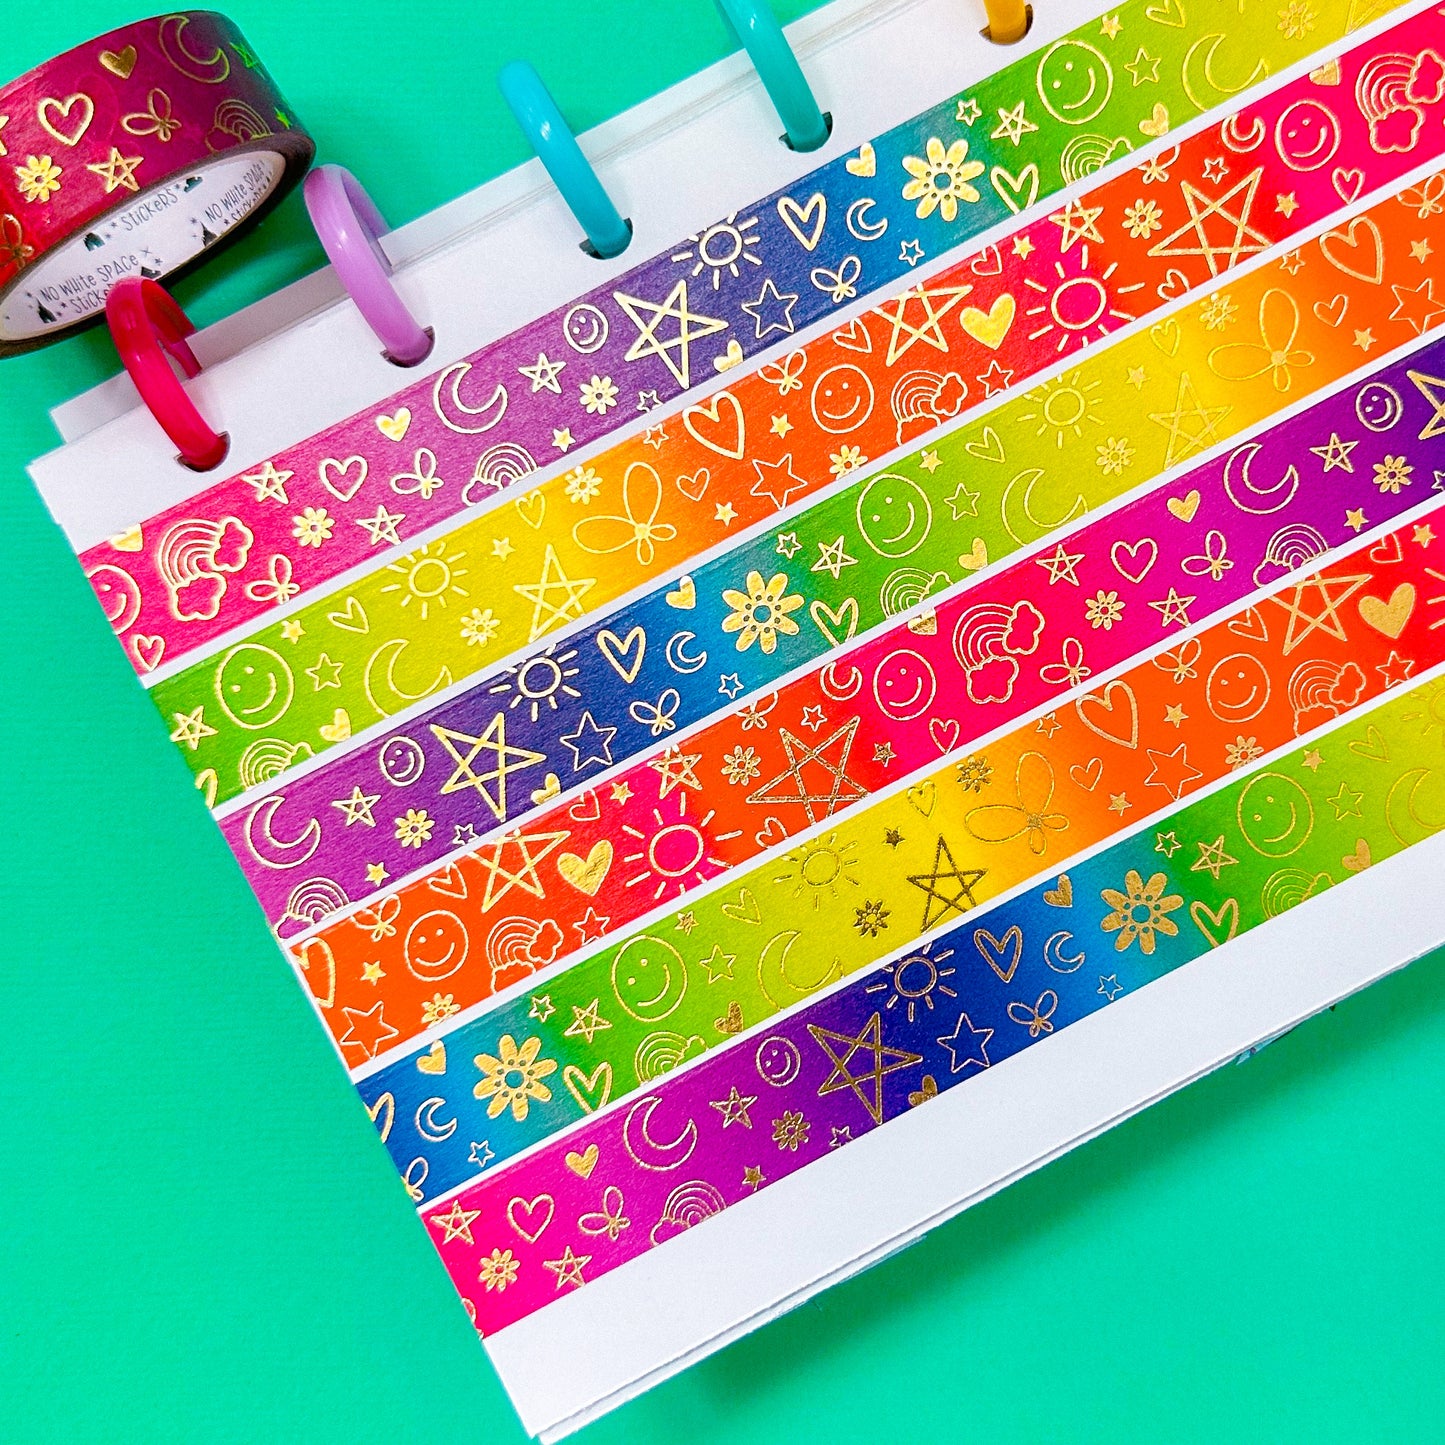 15MM Foiled Washi Tape - Rob's Doodles (Rainbow + Gold)